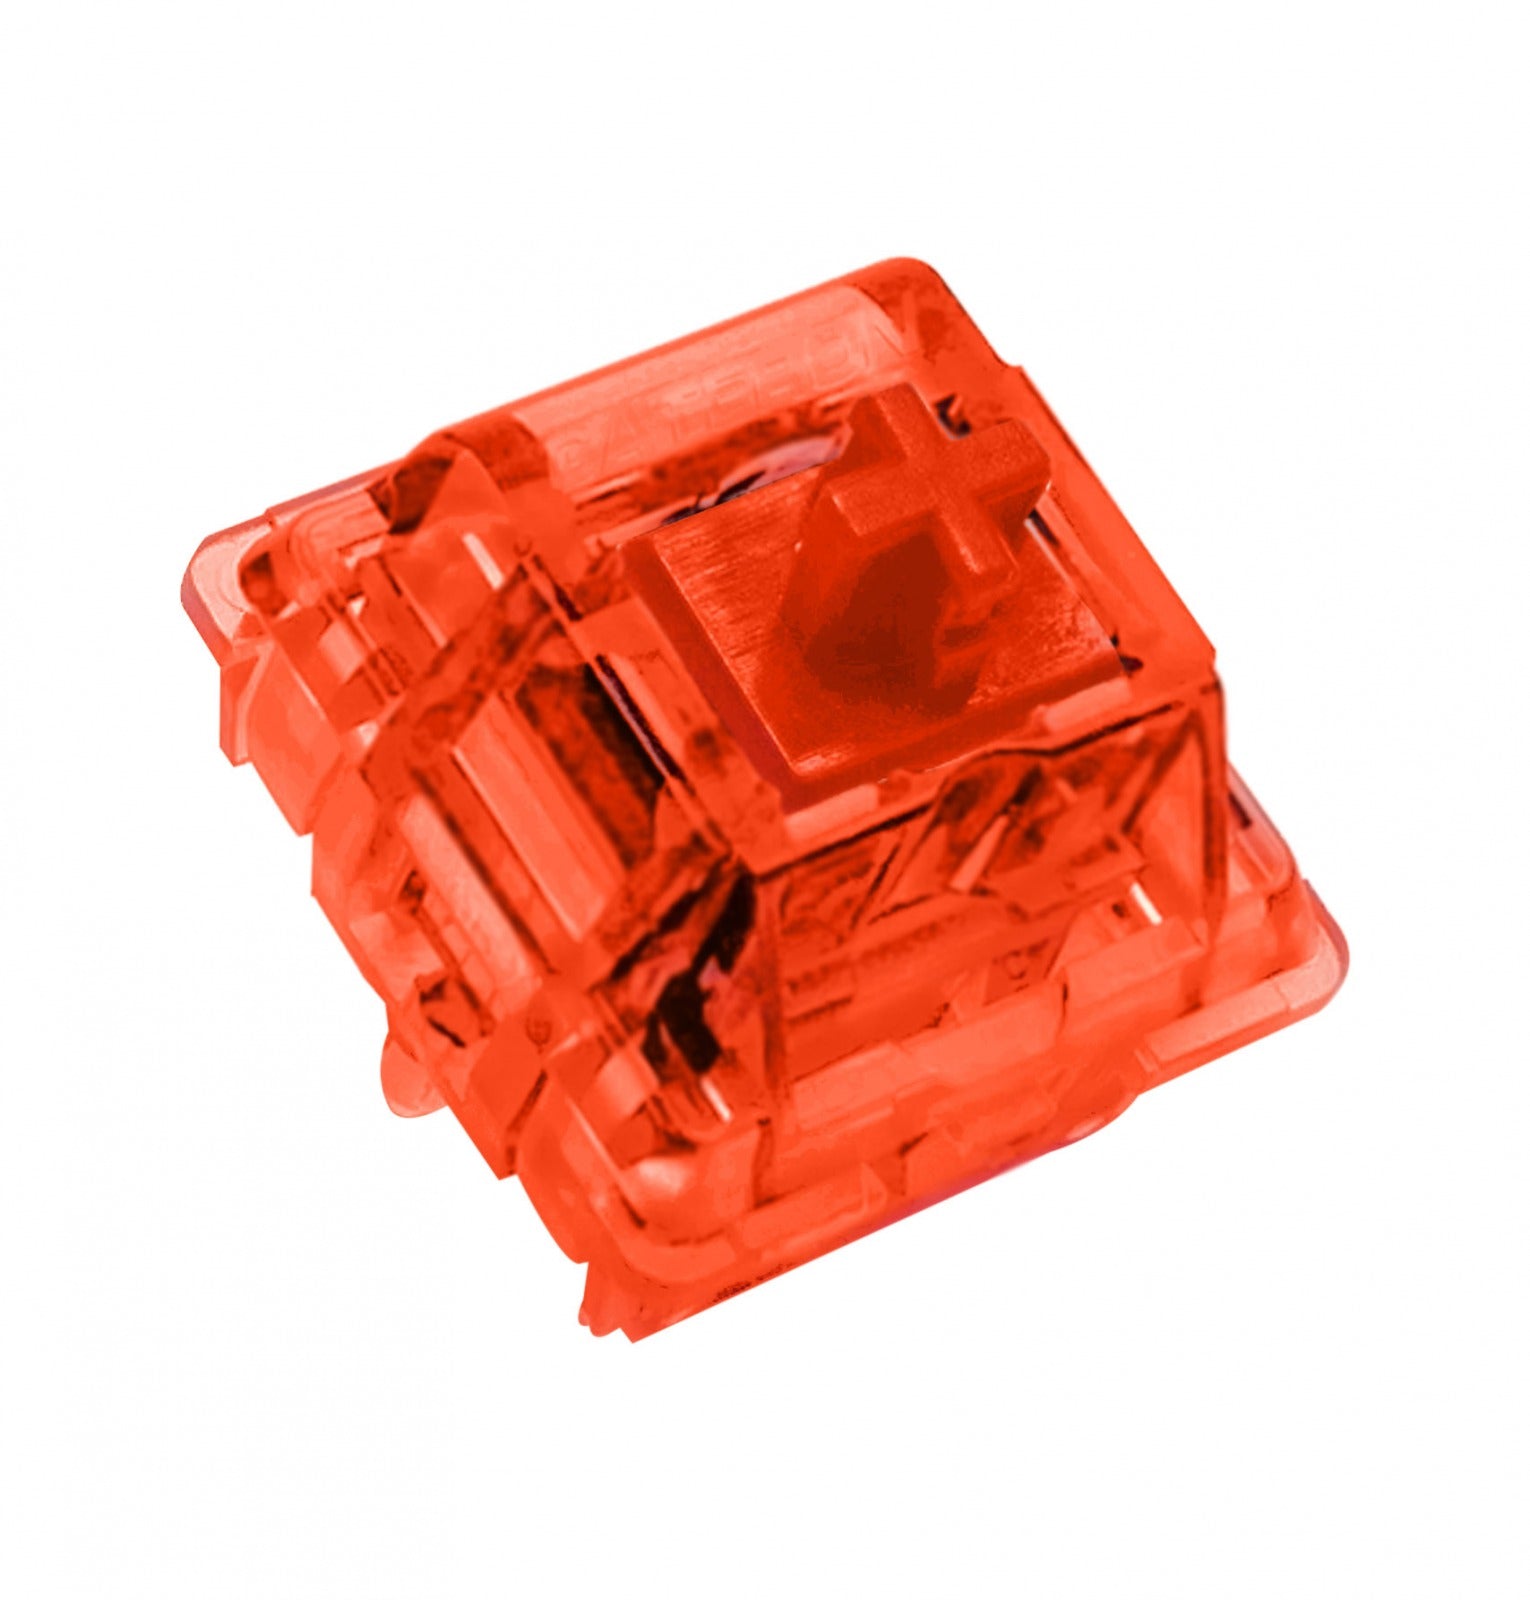 Gateron Ink Red V2 45g Linear PCB Mount Switch MKXC83717N |0|